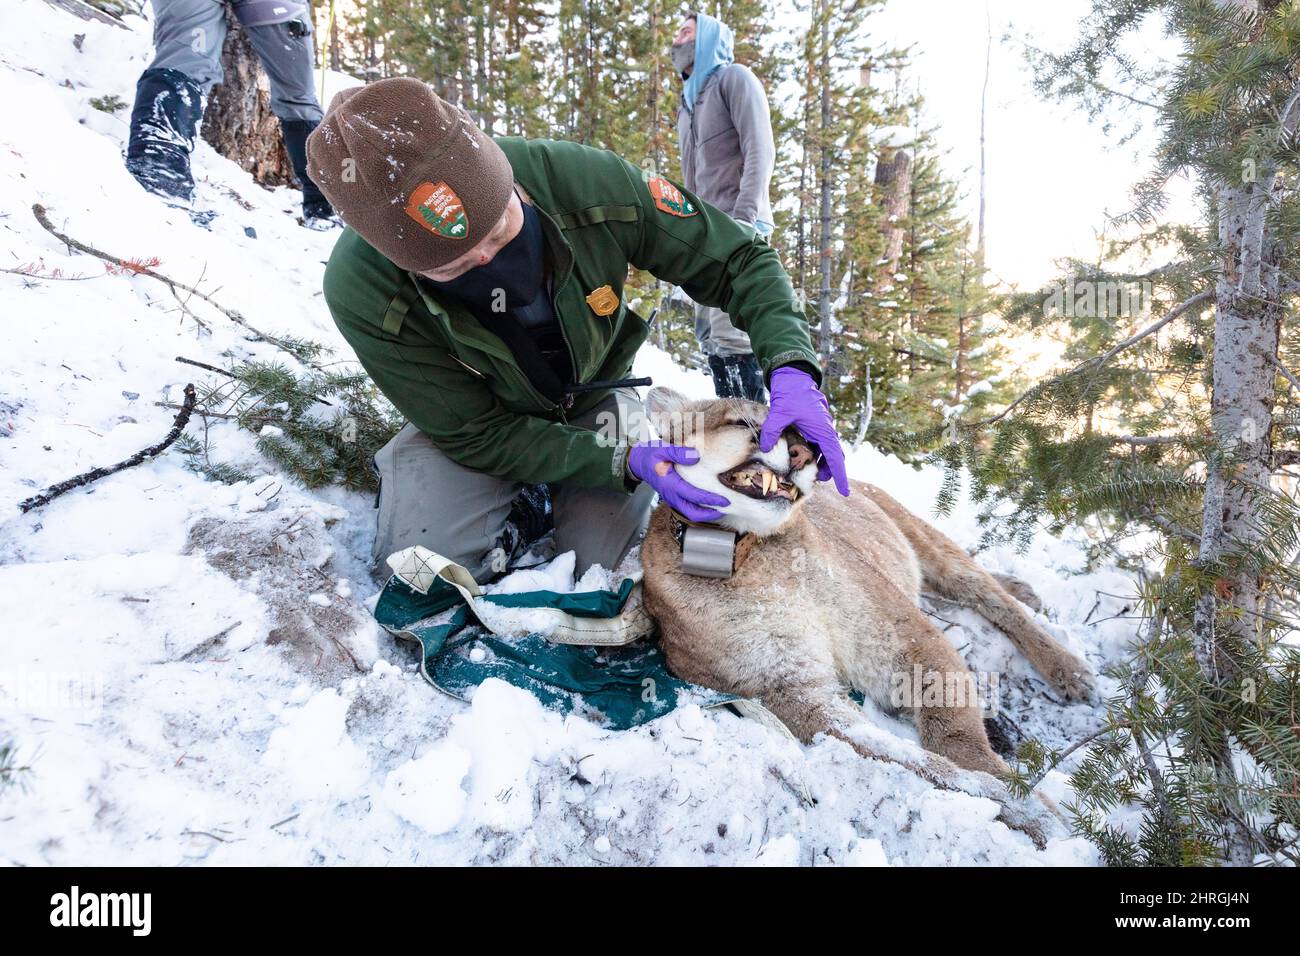 Park Service wildlife biologists check the health after adding a tracker to a male cougar captured in Yellowstone National Park, Wyoming. Stock Photo